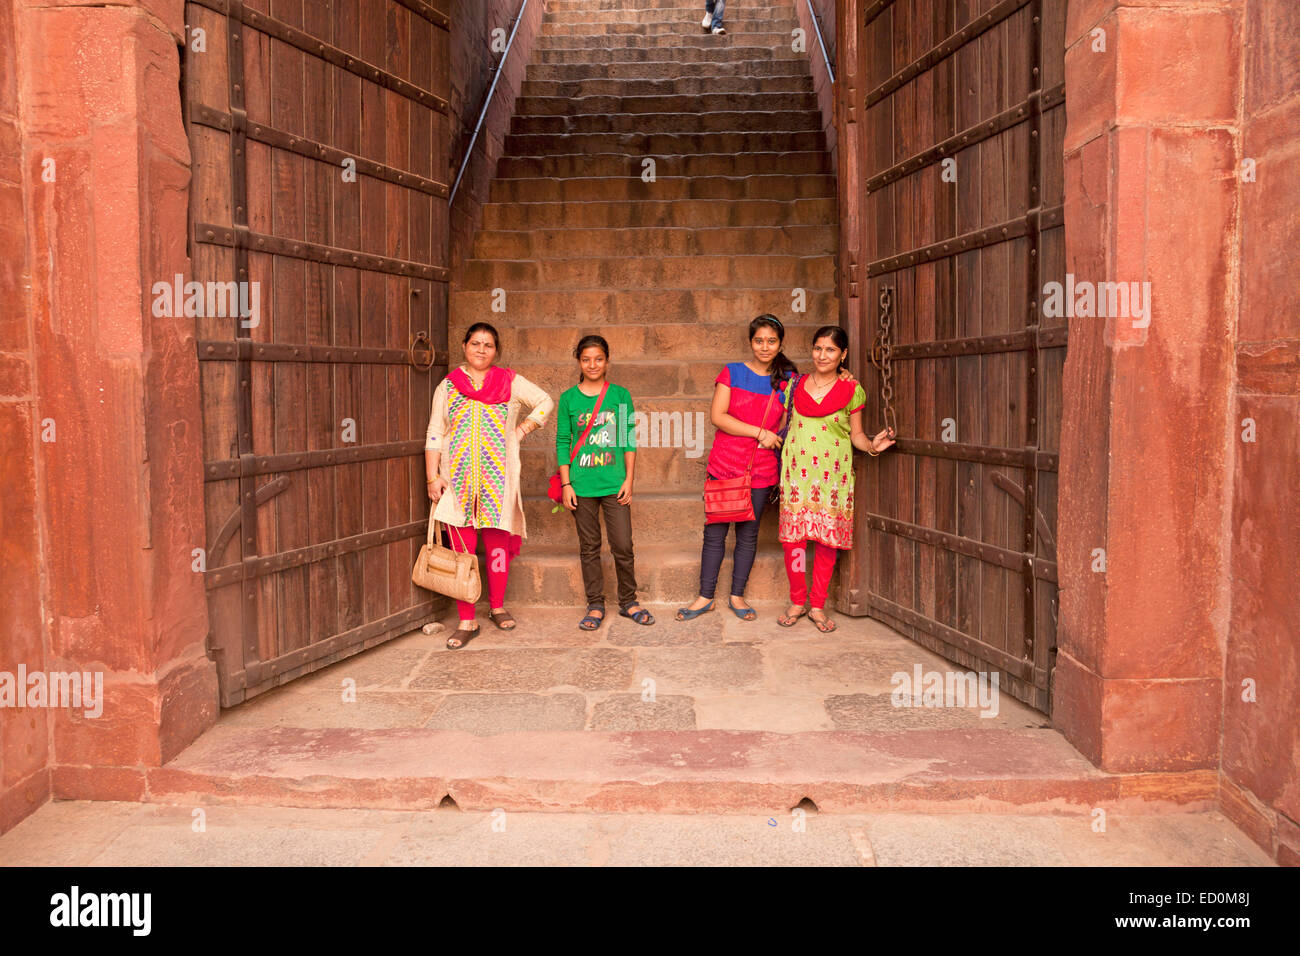 Indian woman at the entrance to Humayun's Tomb, UNESCO world heritage in Delhi, India, Asia Stock Photo